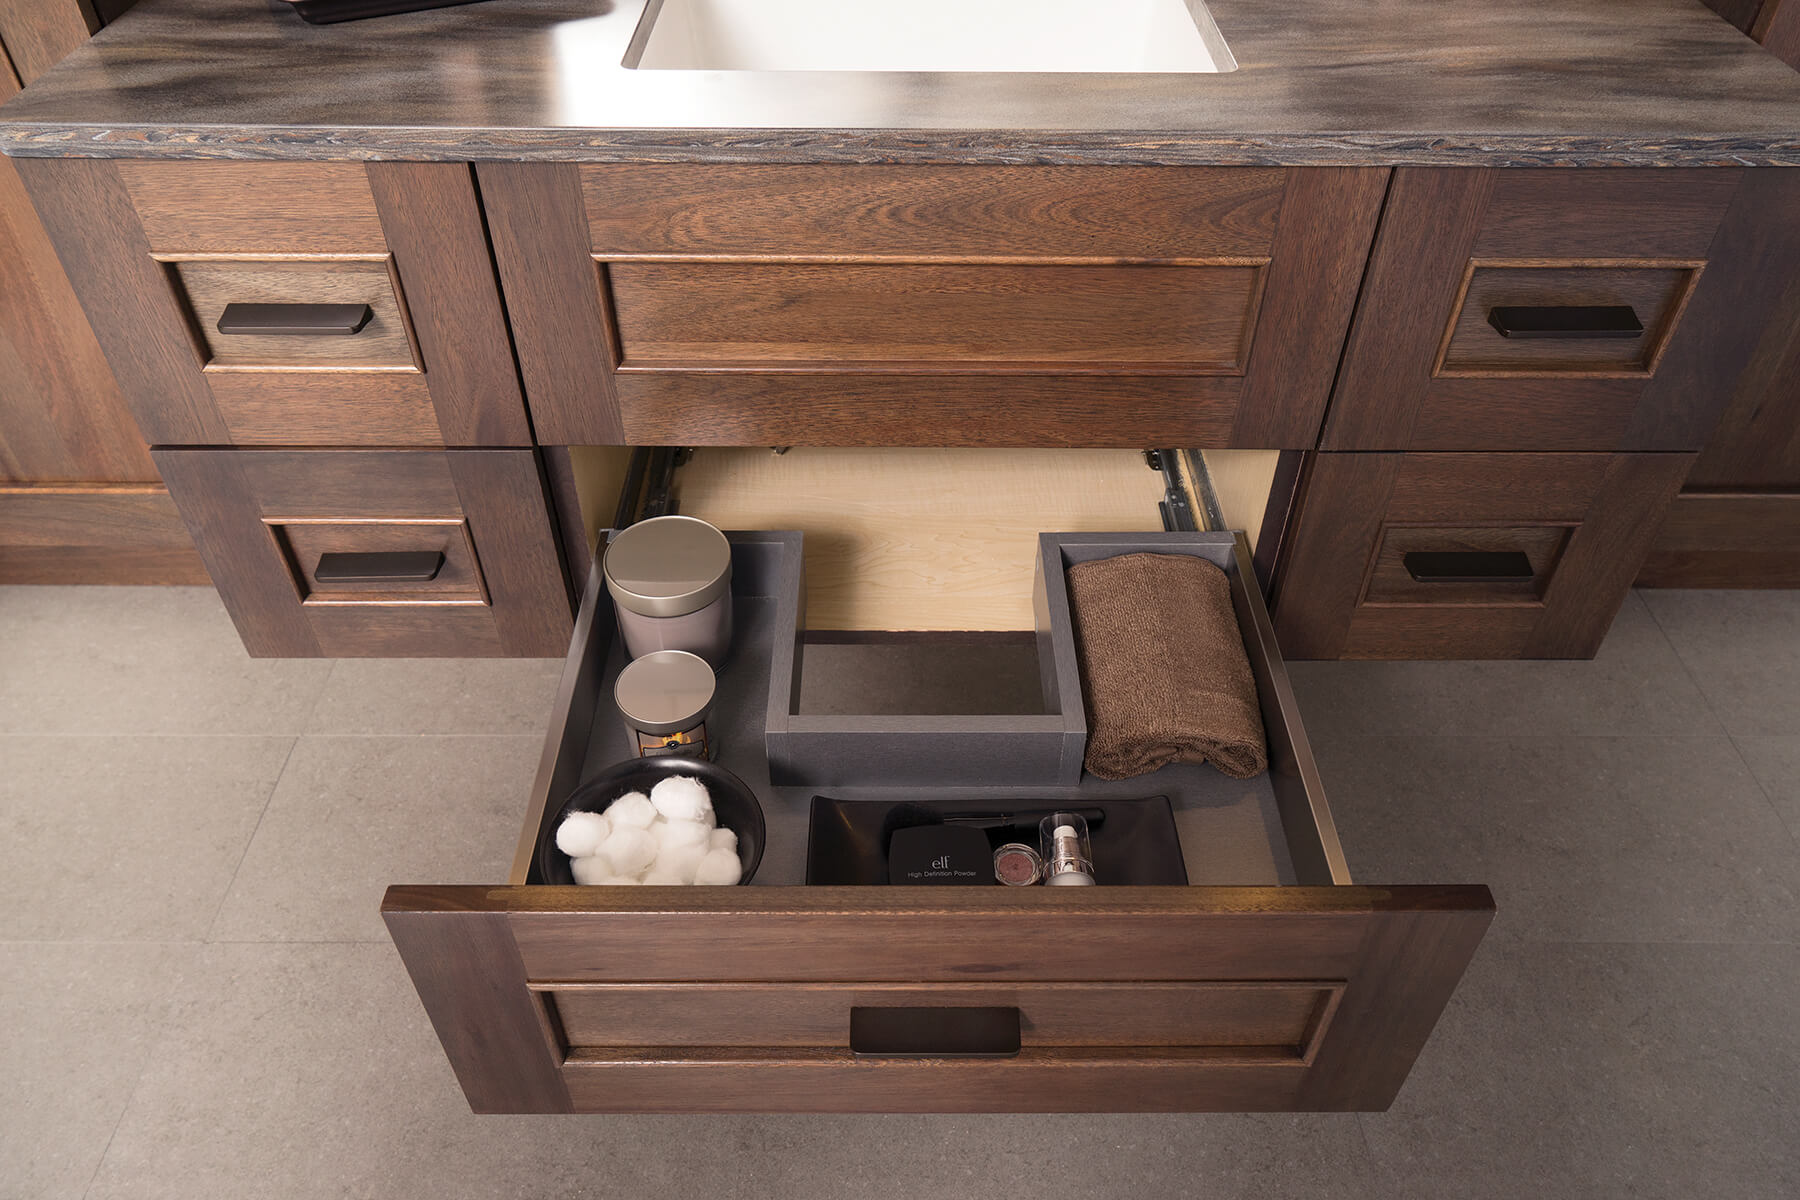 A stainless steel plumbing drawer on a floating vanity cabinet designed to add accessible storage around the plumbing fixtures right below the bathroom sink. This is a great modern cabinet storage solution and is easy to clean.